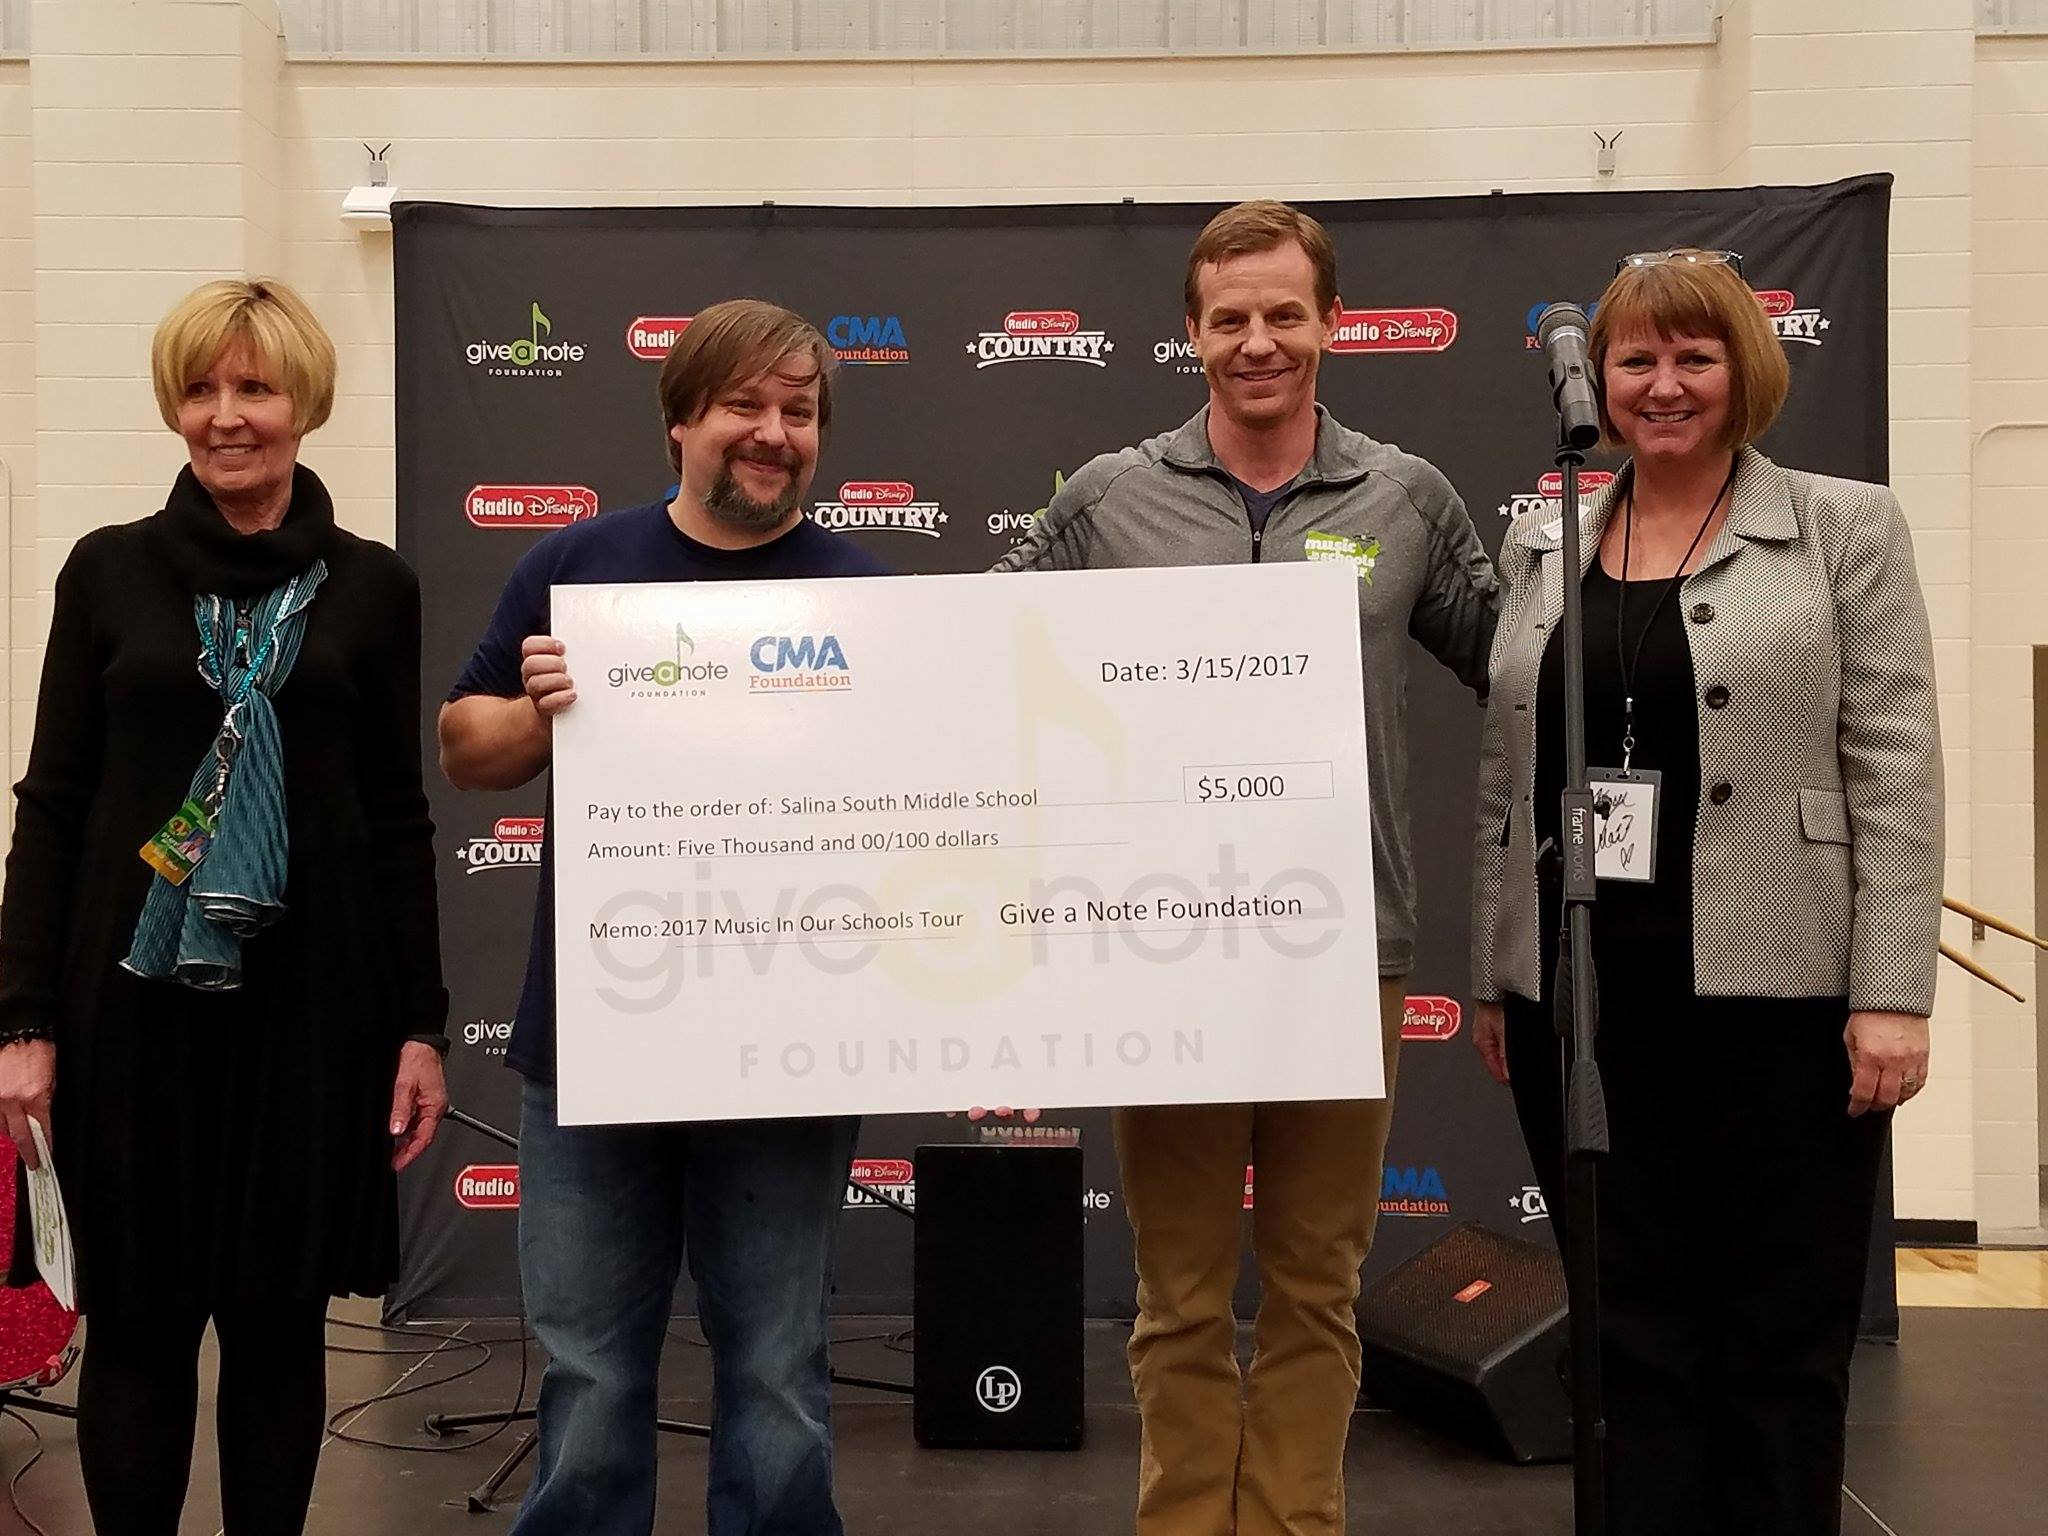 Salina South Middle School teacher Matt Gerry receives a grant check from Give a Note Foundation.